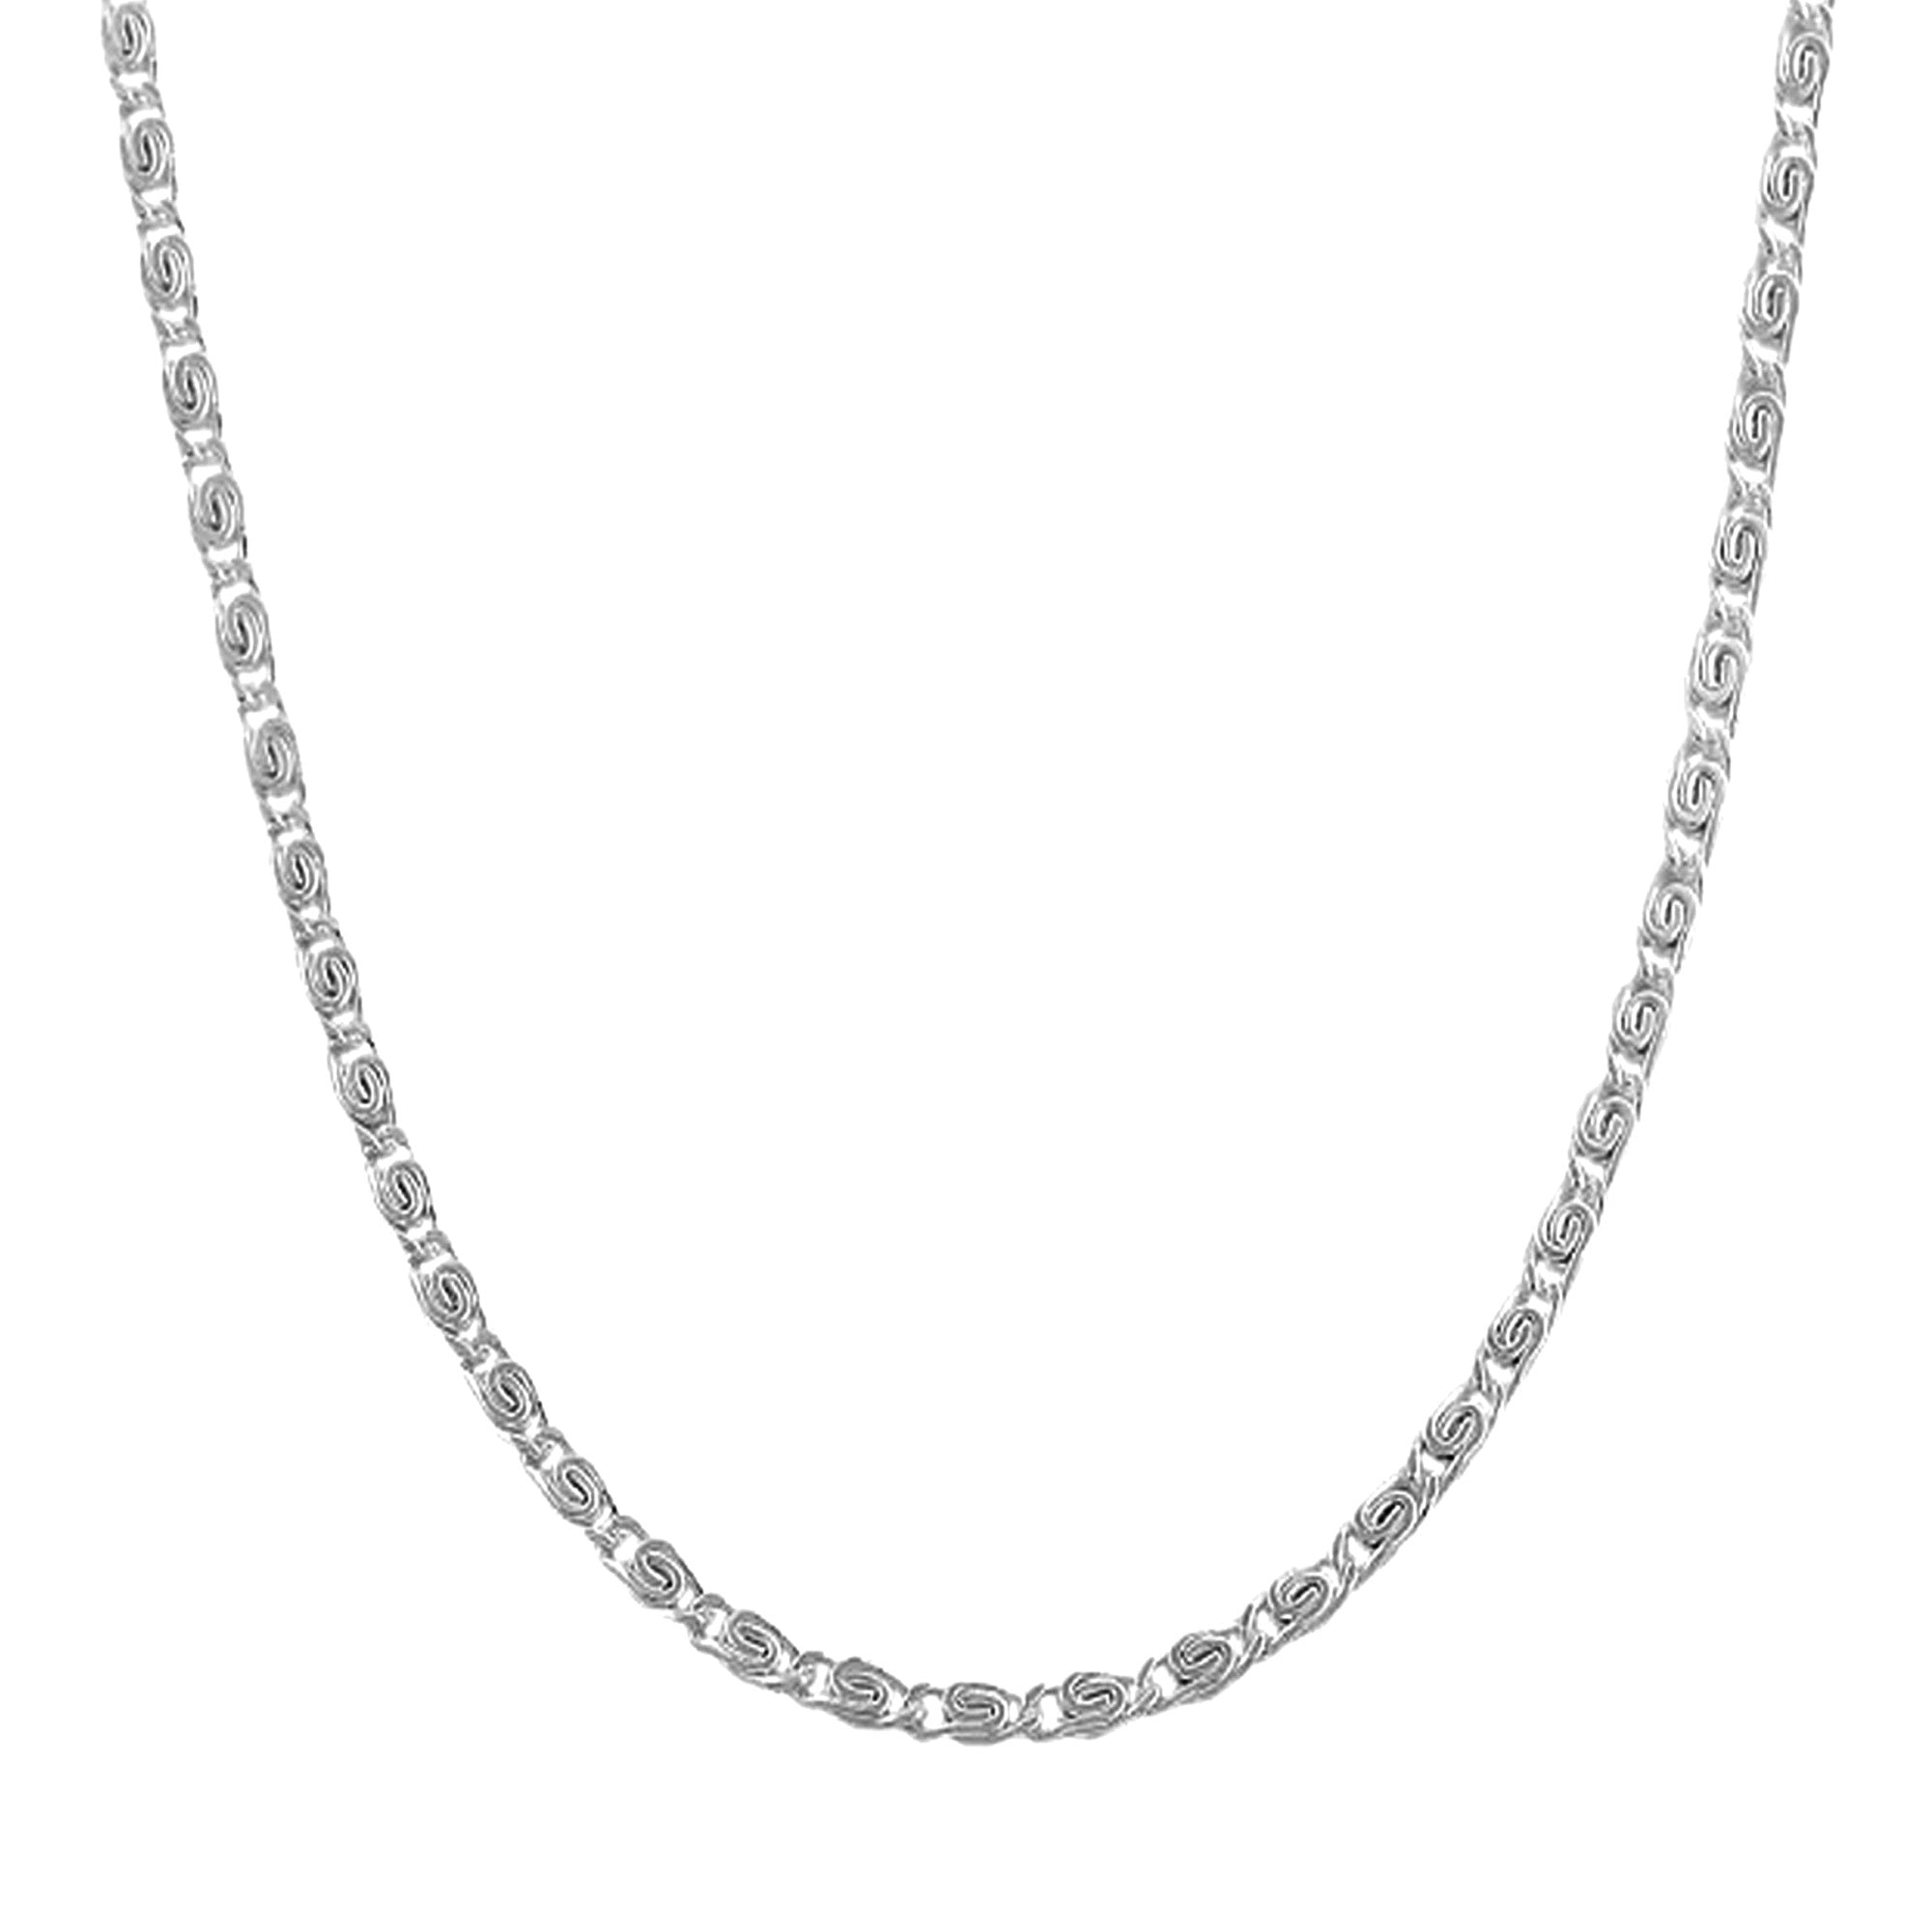 10K White Gold Tigers Eye Chain Necklace, 2.3mm, 18" fine designer jewelry for men and women